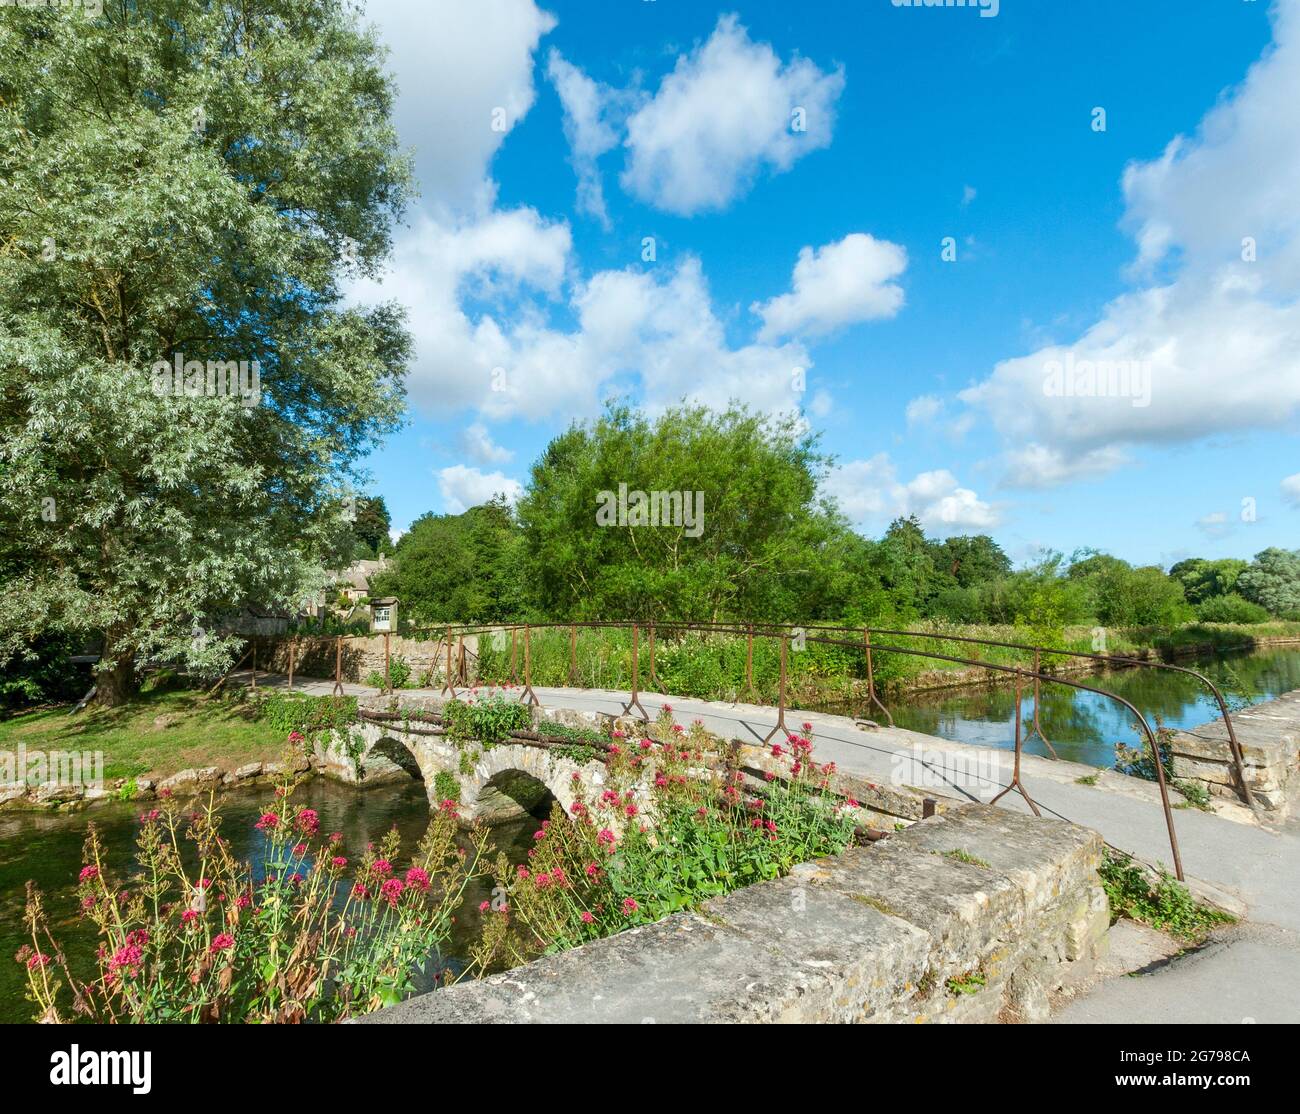 Great Britain, GL Gloucestershire, Bibury near Cirencester, bridge over the River Coln, historic stone bridge, footpath to Arlington Row. The artist and writer William Morris called Bibury 'the most beautiful village in England'. Stock Photo